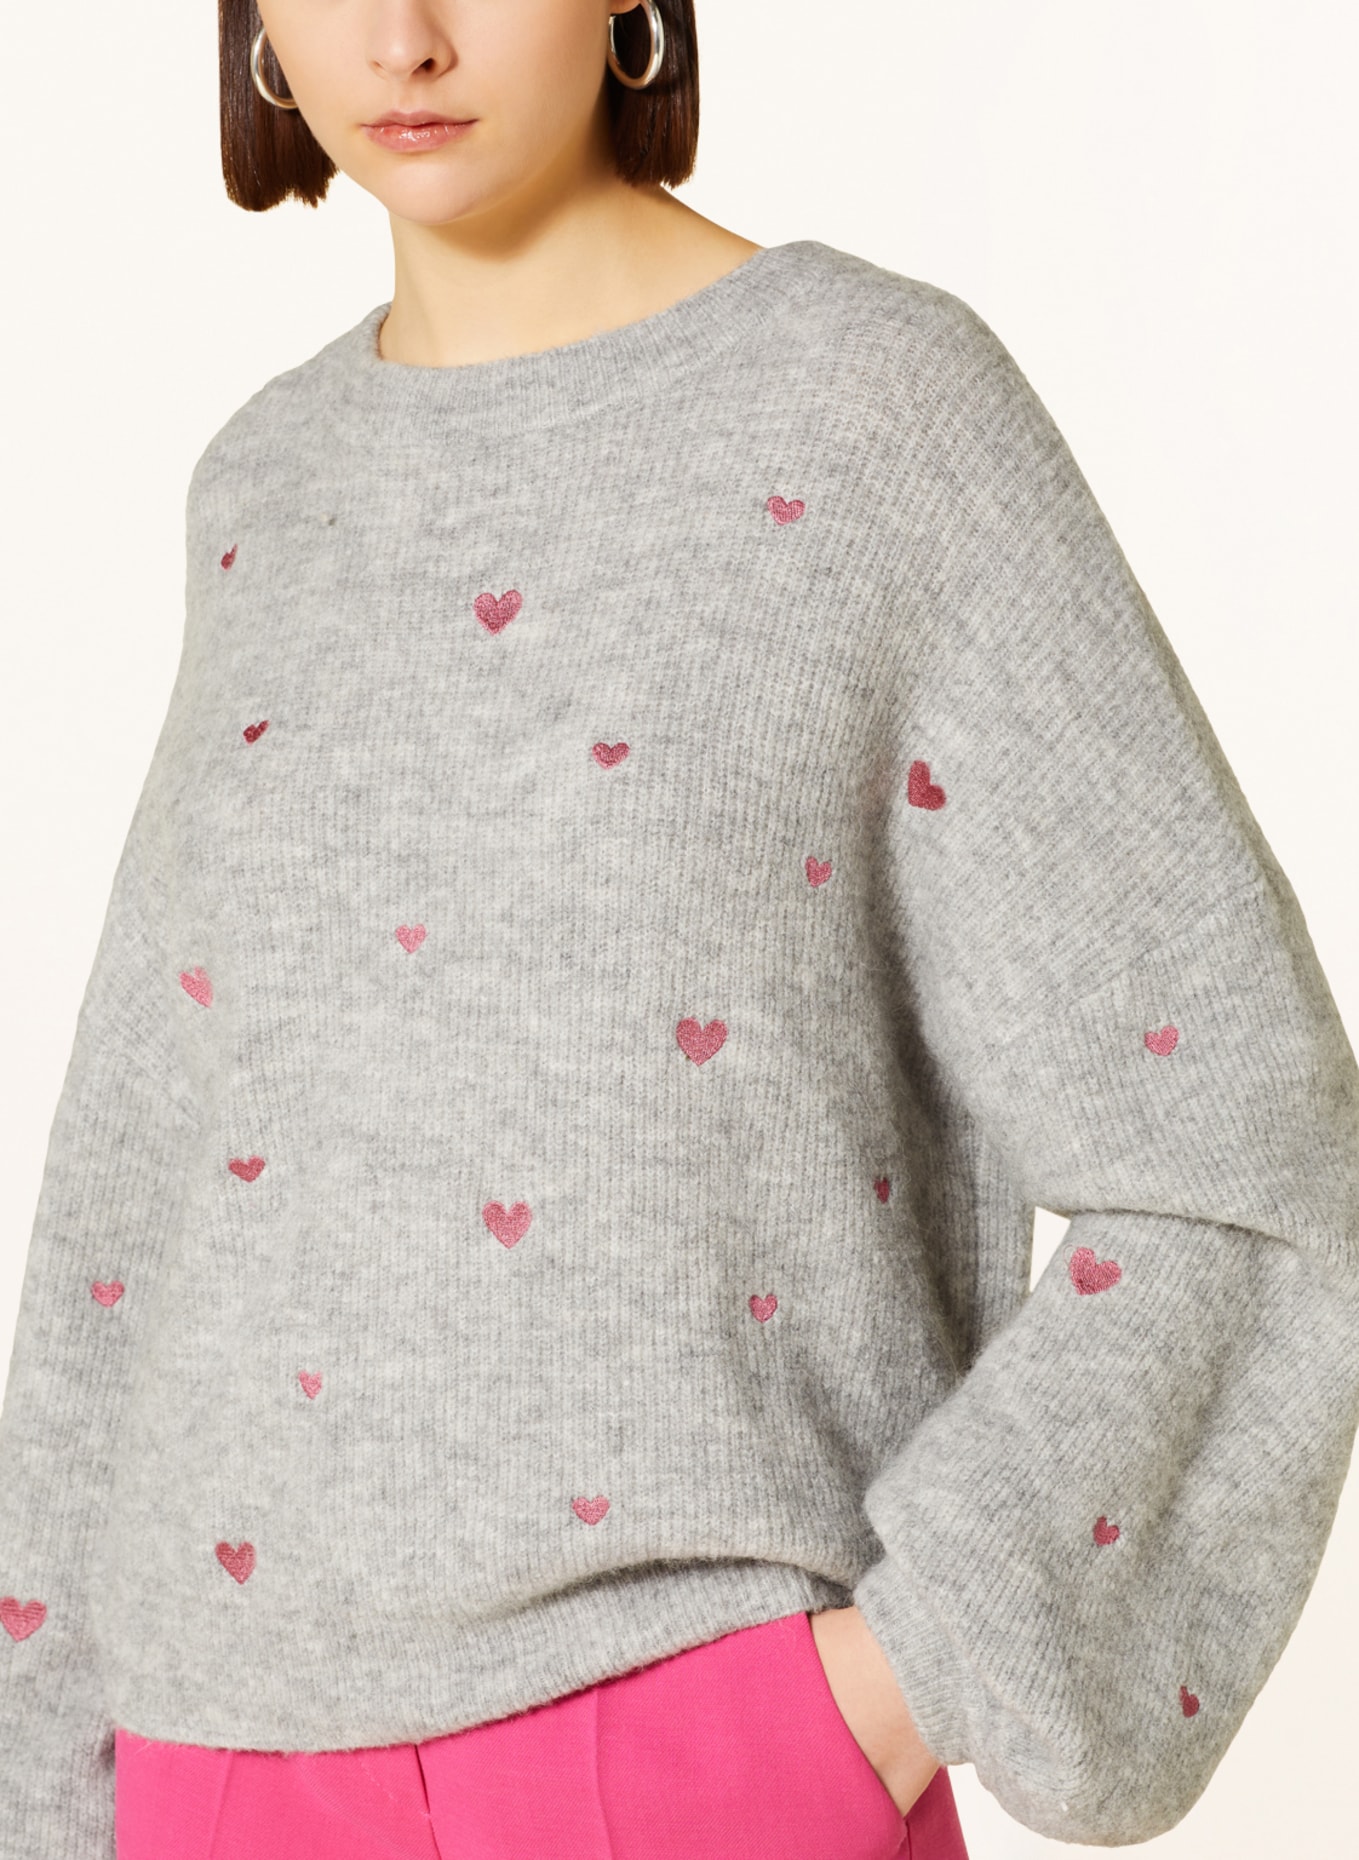 FABIENNE CHAPOT Sweater LIDIA with embroidery, Color: GRAY/ DUSKY PINK (Image 4)